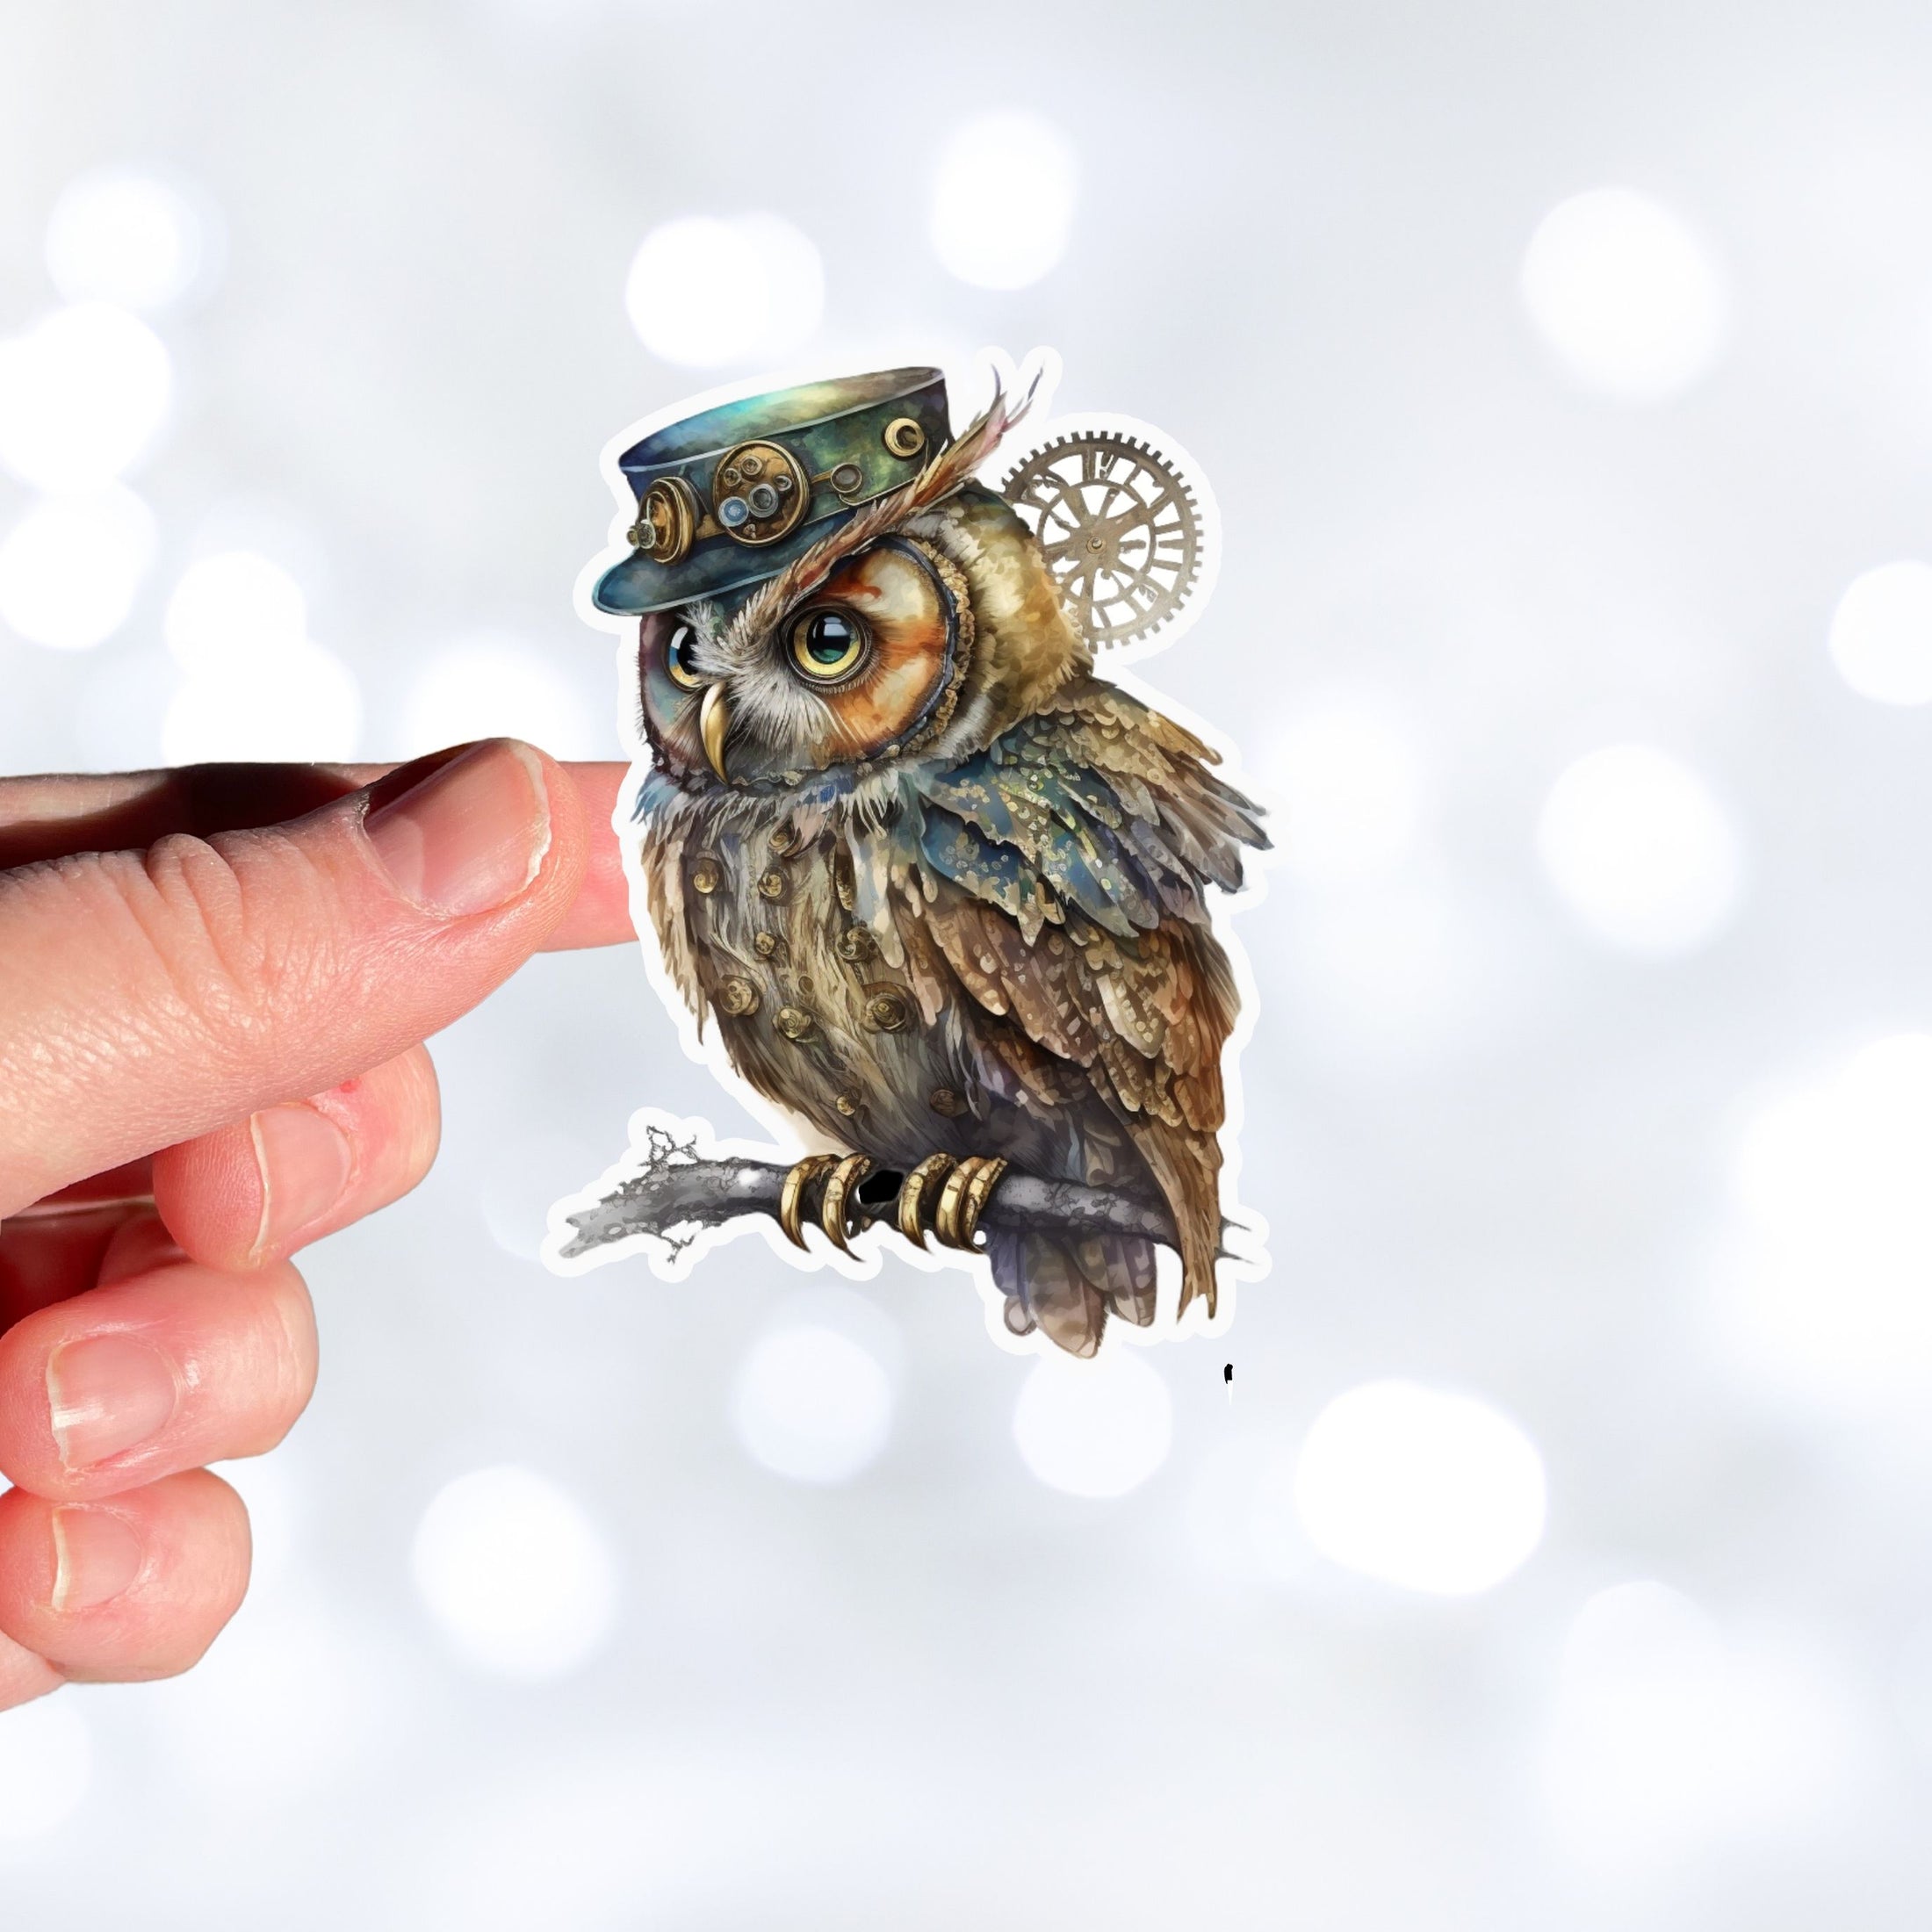 This image shows the steampunk owl sticker on a finger.